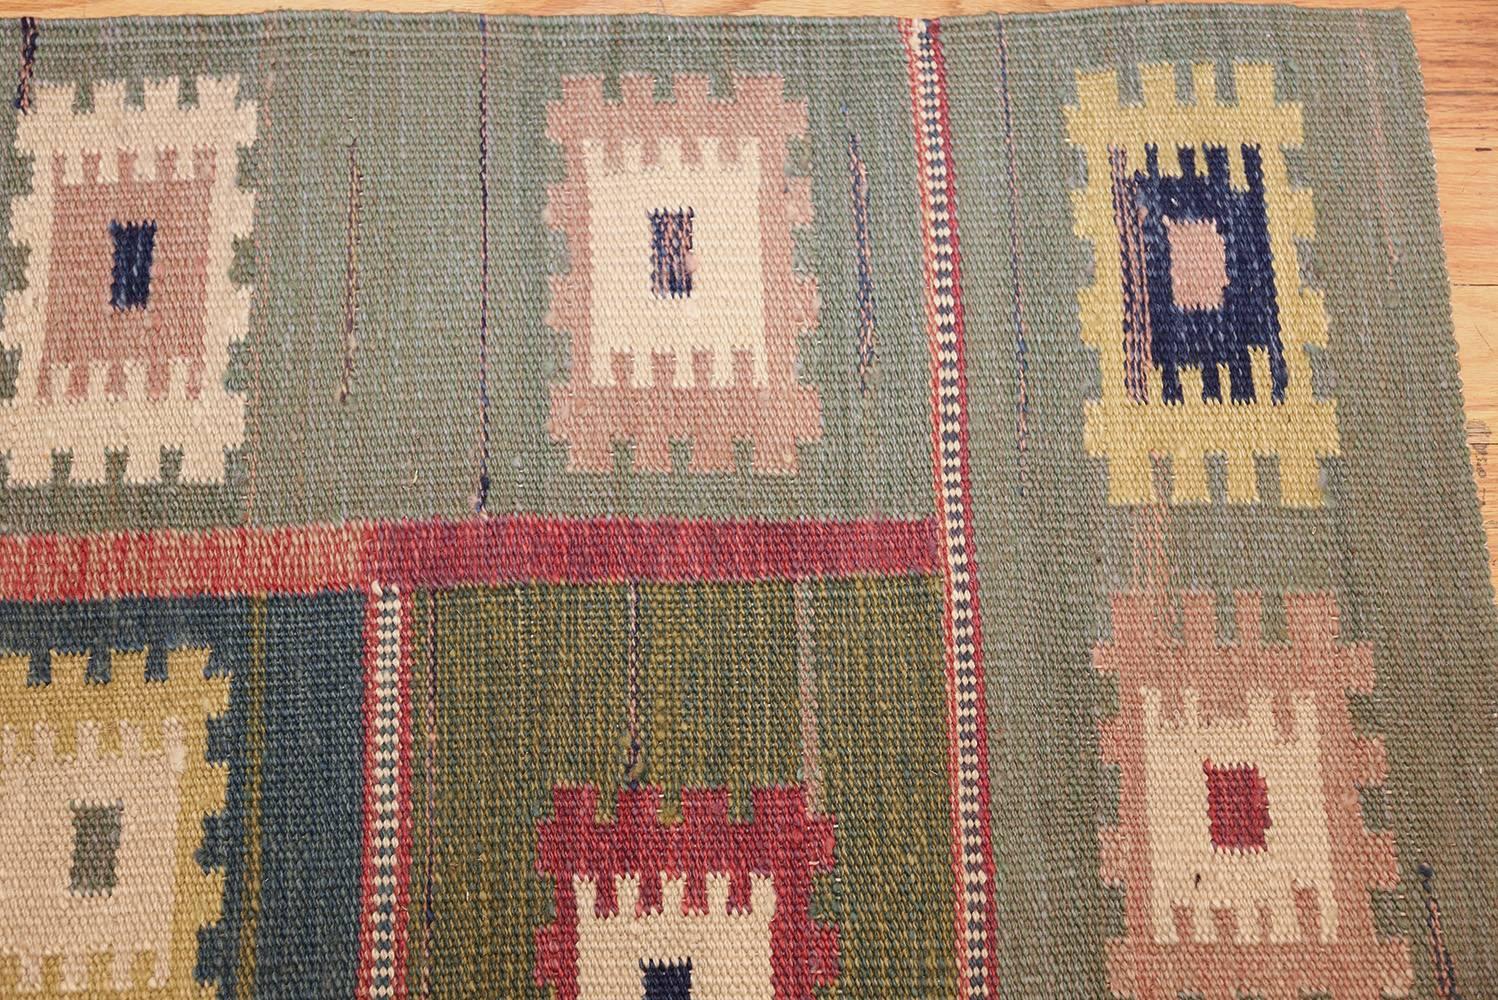 Contemporary Vintage Inspired Swedish Scandinavian Kilim Rug. Size: 4 ft 4 in x 6 ft 3 in